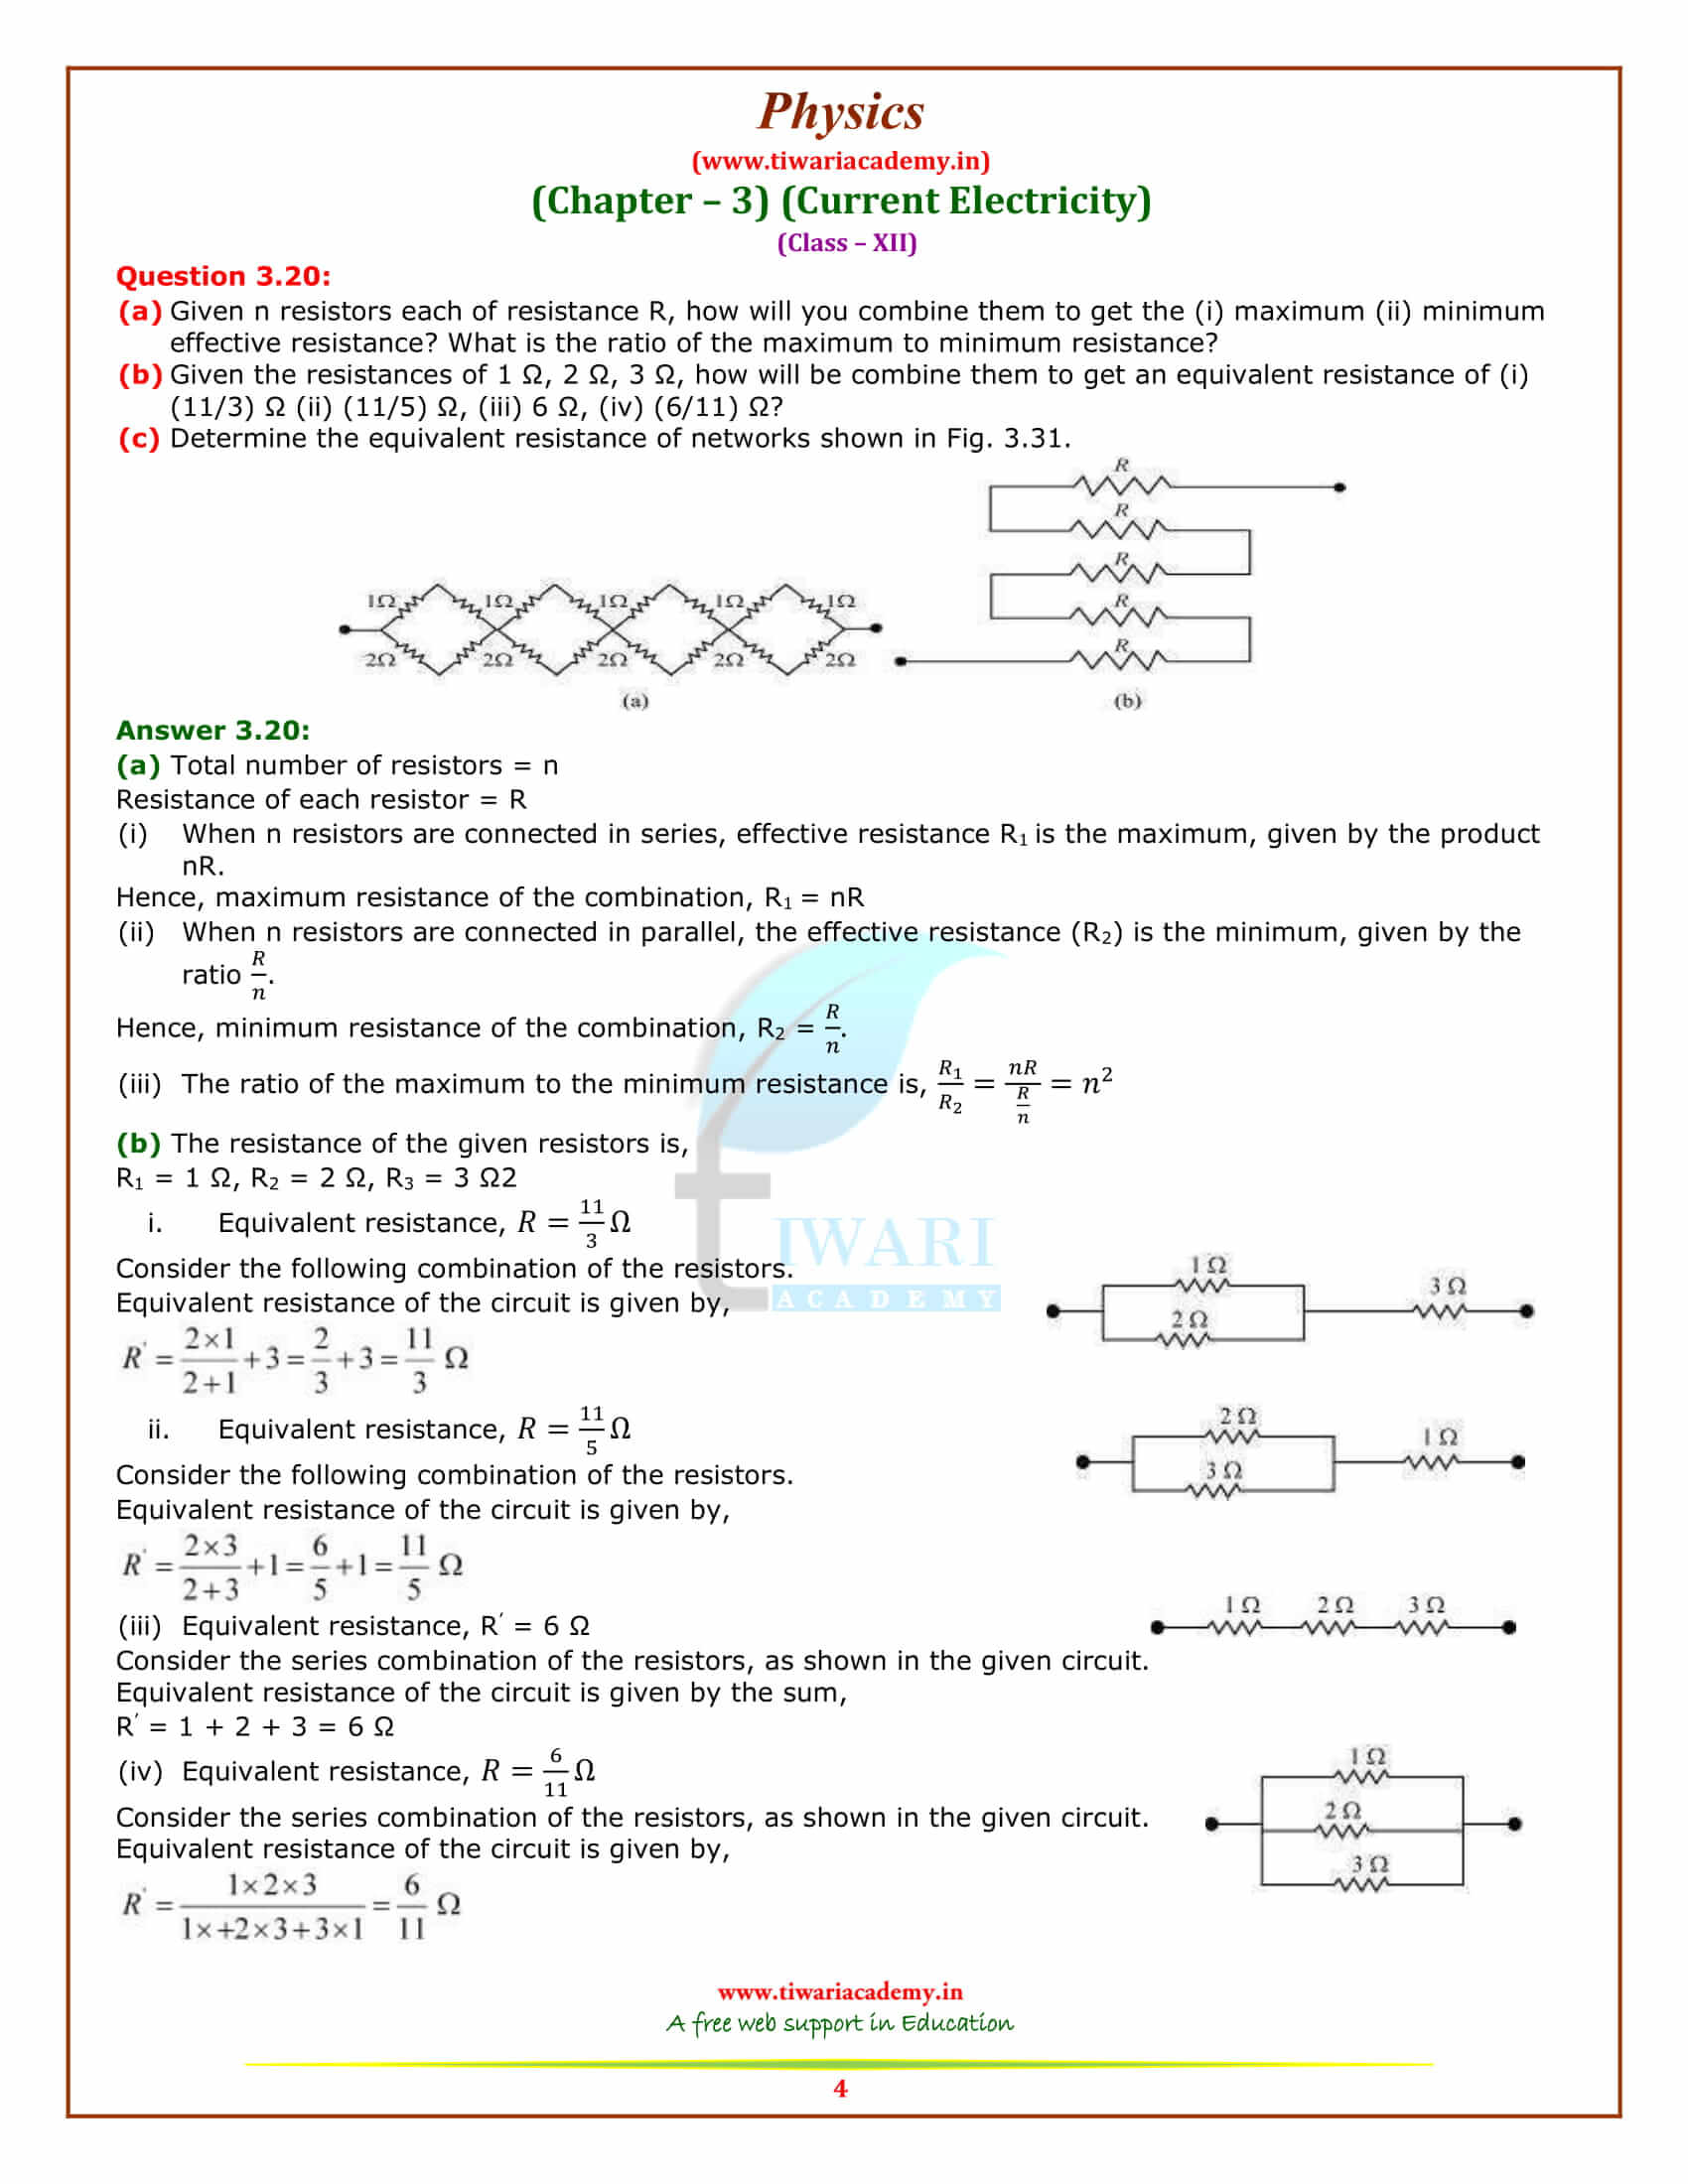 NCERT Solutions for Class 12 Physics Chapter 3 Current Electricity additional questions